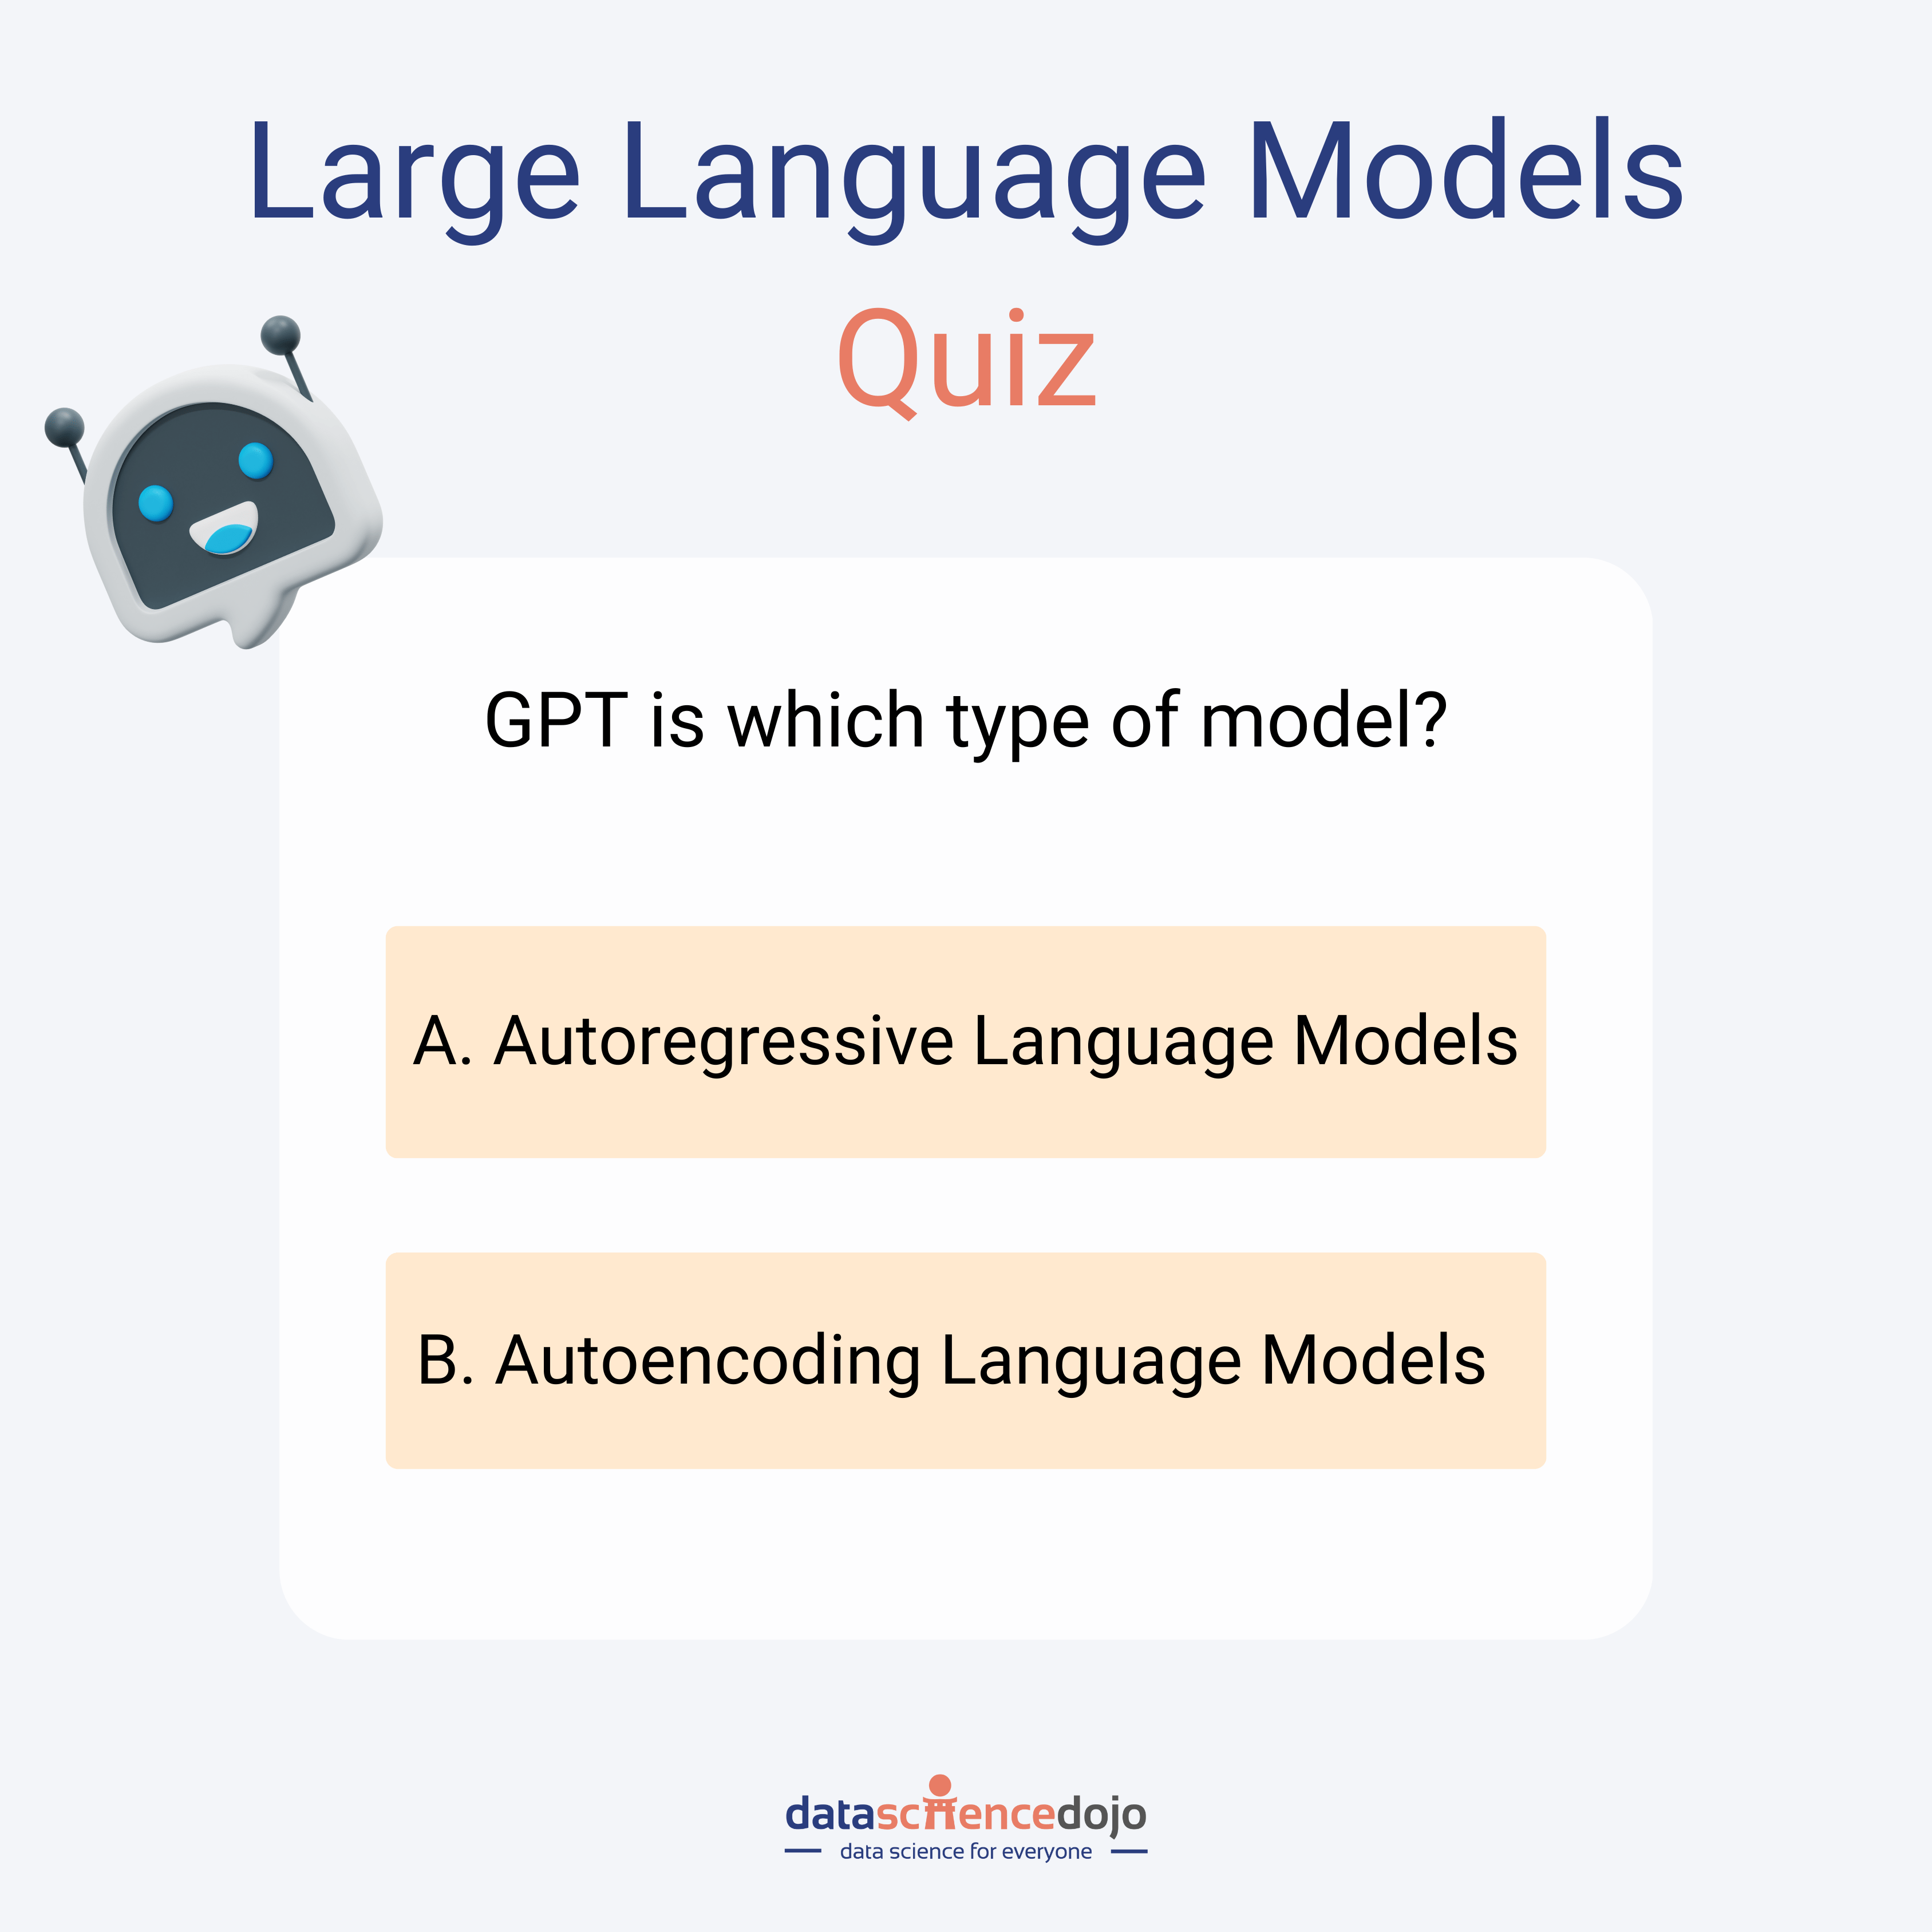 Are you a Large Language Models expert? Test your knowledge with our quiz | Data Science Dojo